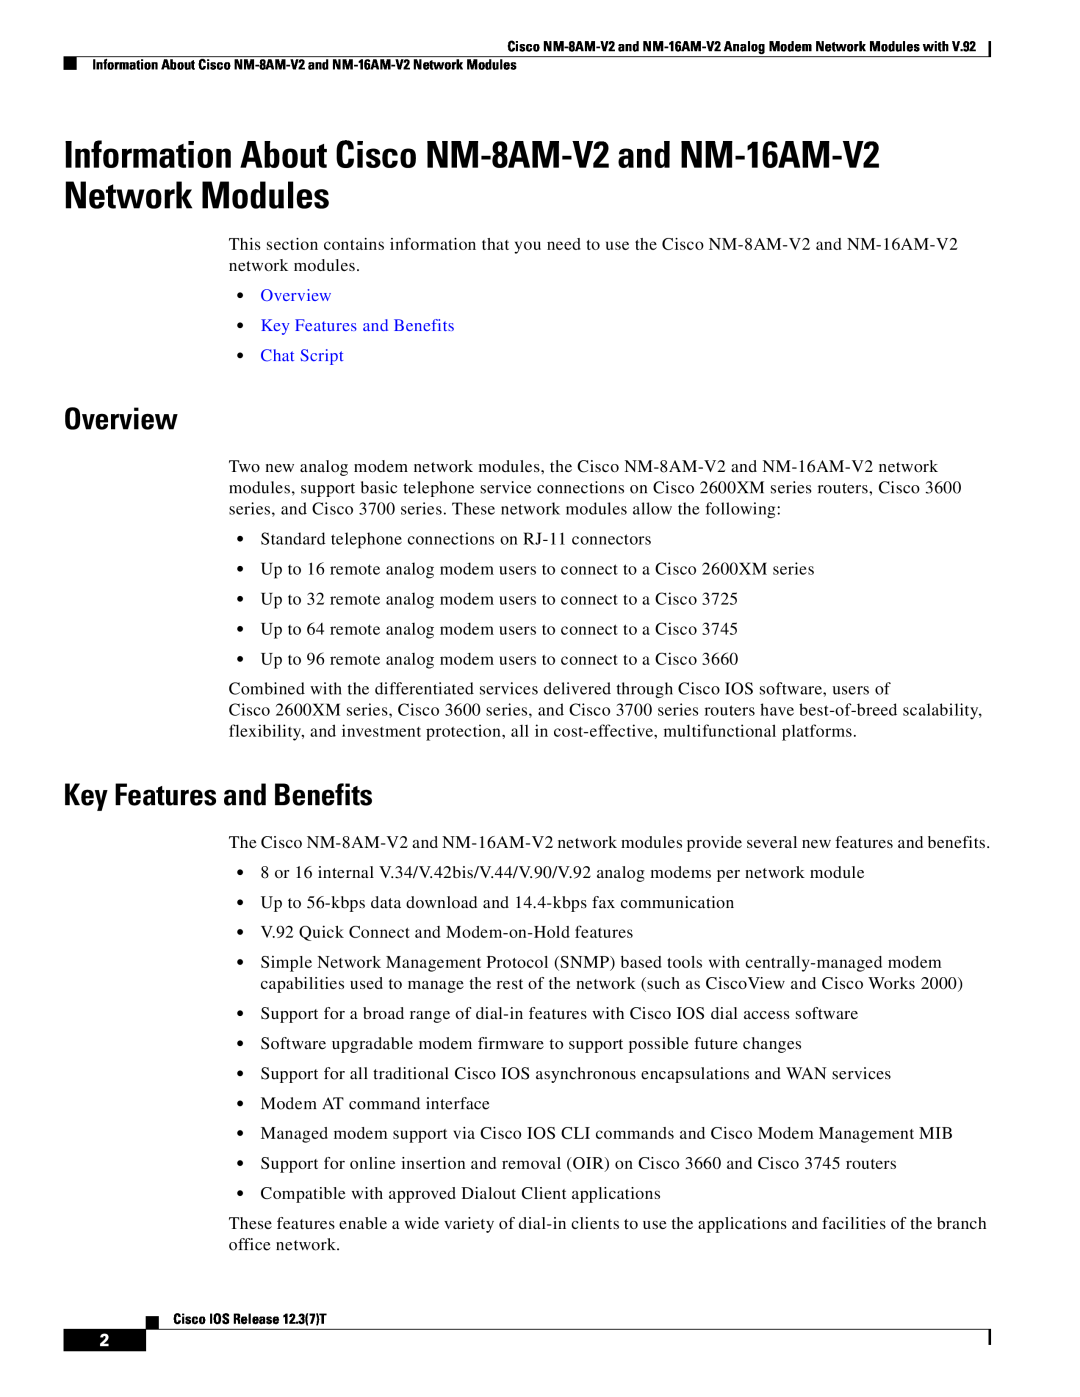 Cisco Systems Information About Cisco NM-8AM-V2 and NM-16AM-V2 Network Modules, Overview, Key Features and Benefits 